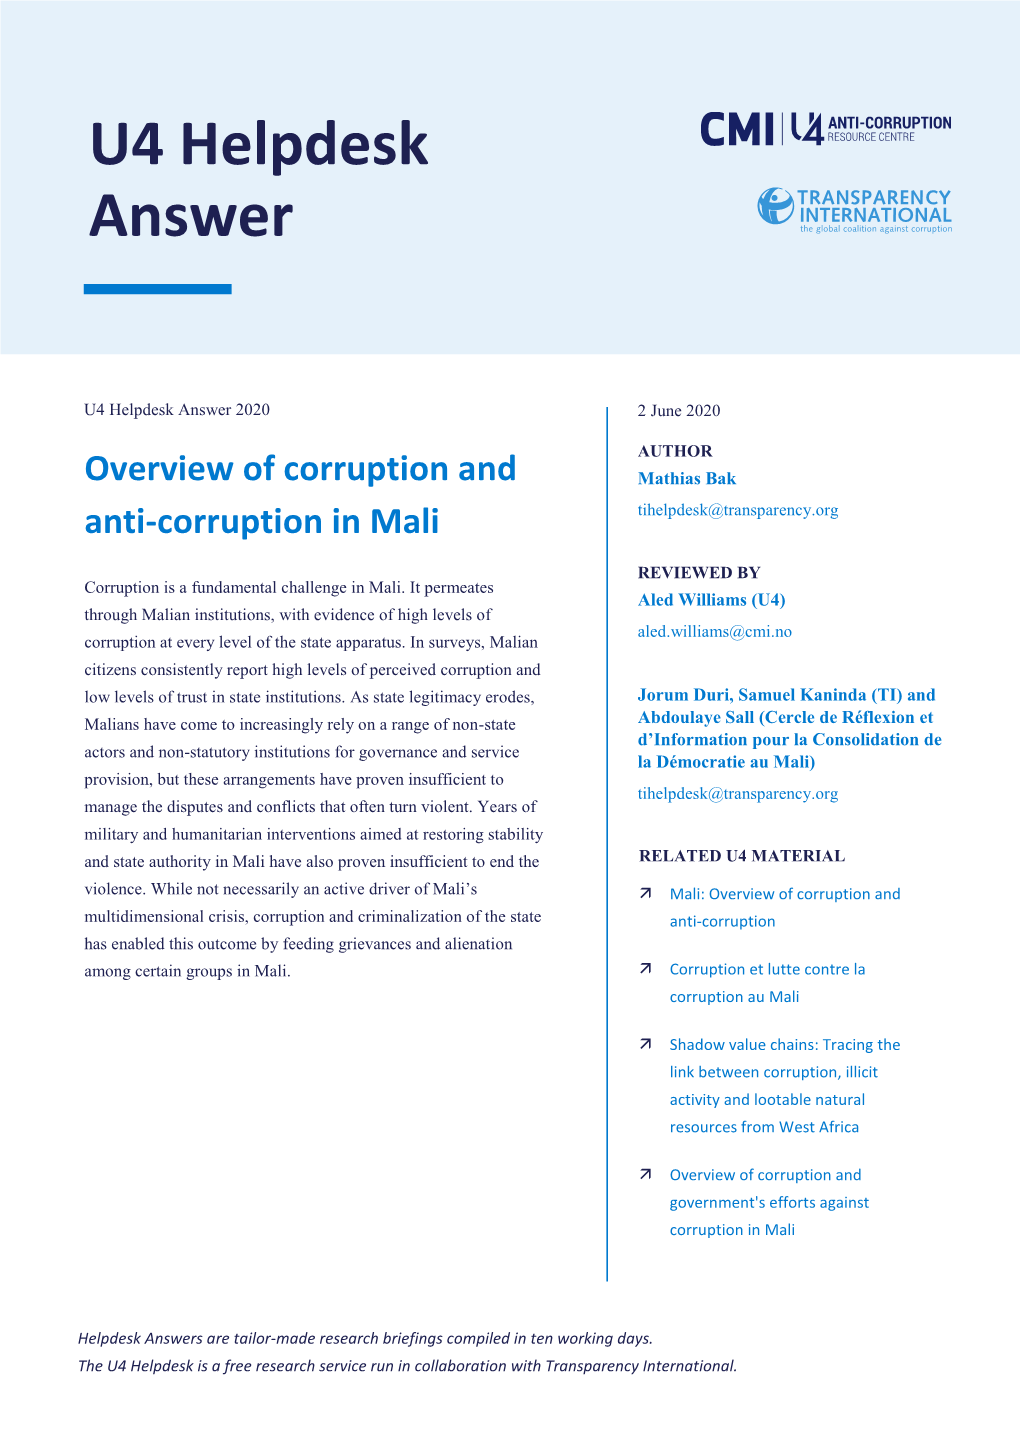 Overview of Corruption and Anti-Corruption in Mali 2